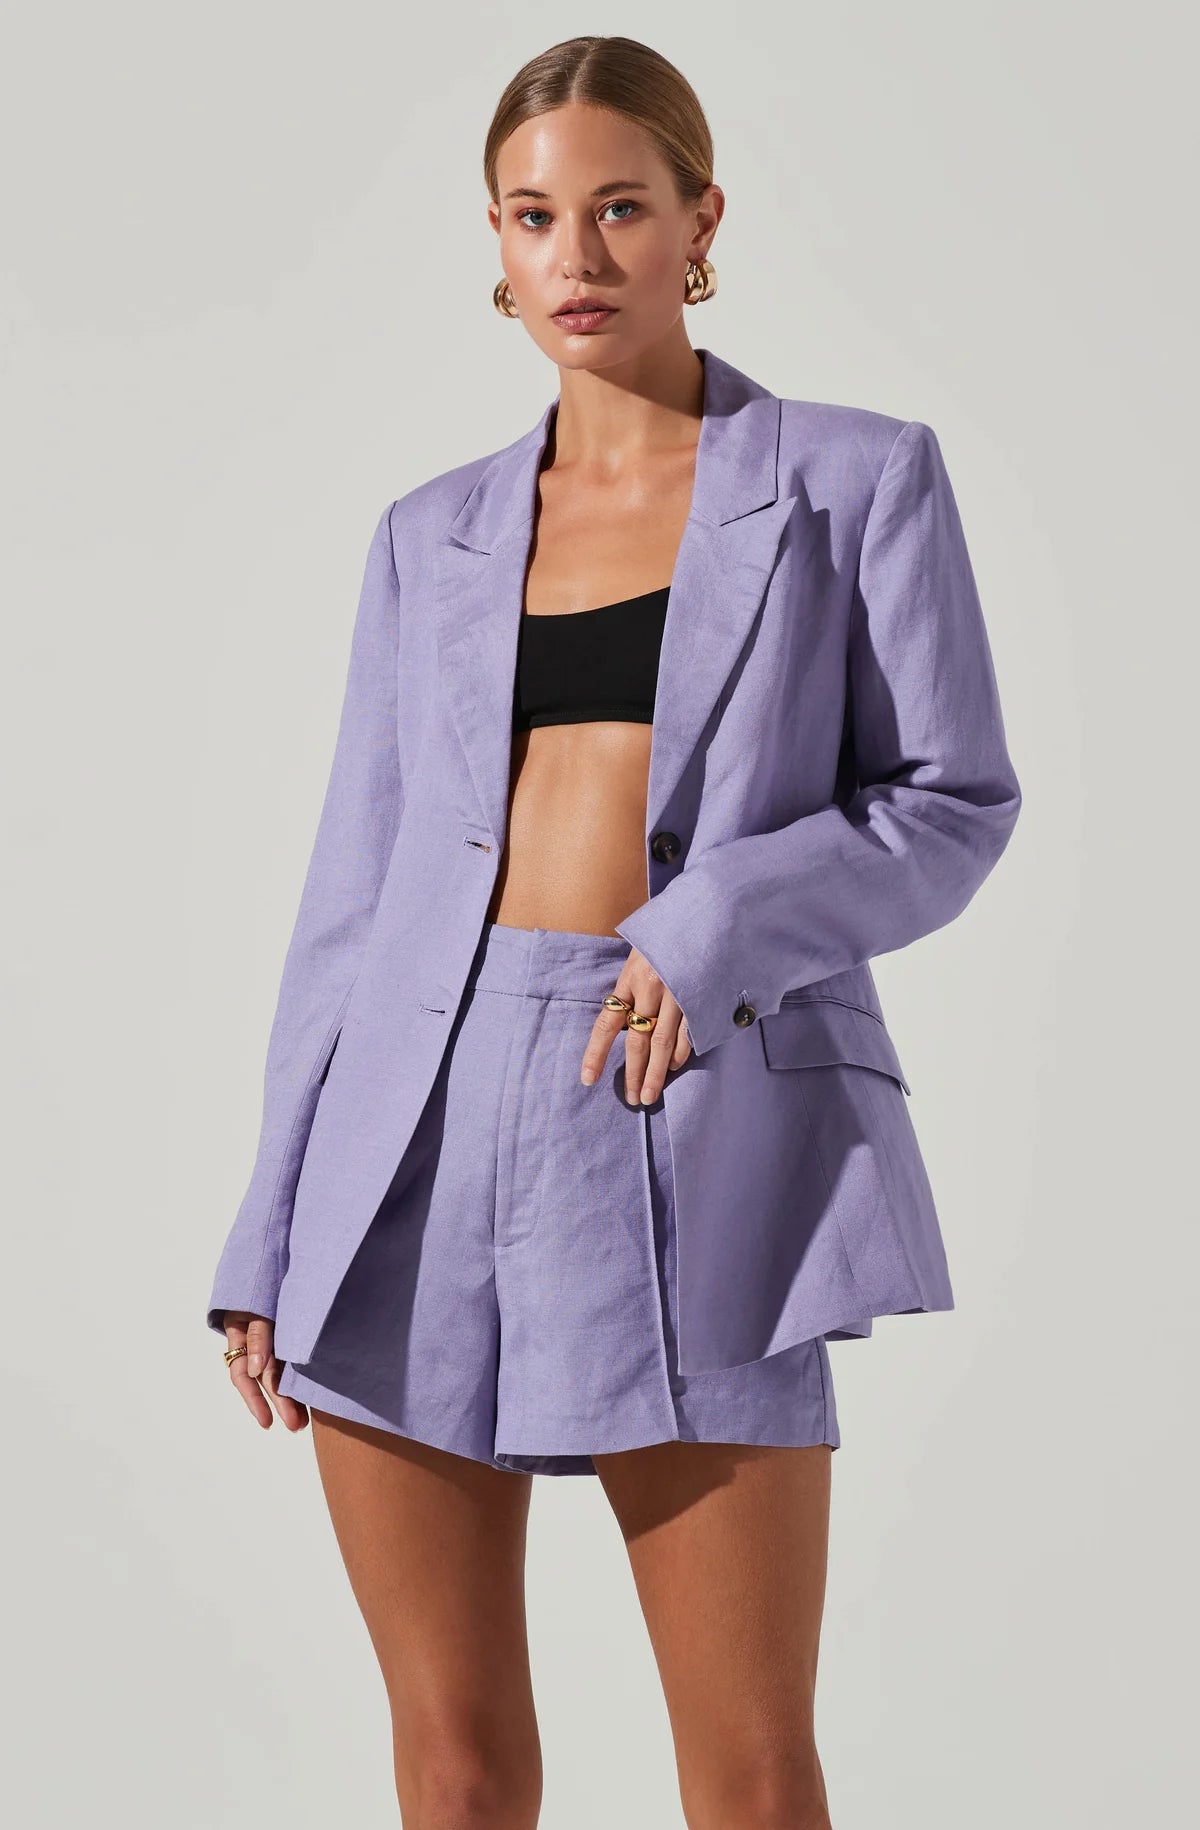 Model wearing Ayra Front Button Blazer in Purple from ASTR The Label available at UniKoncept in Waterloo